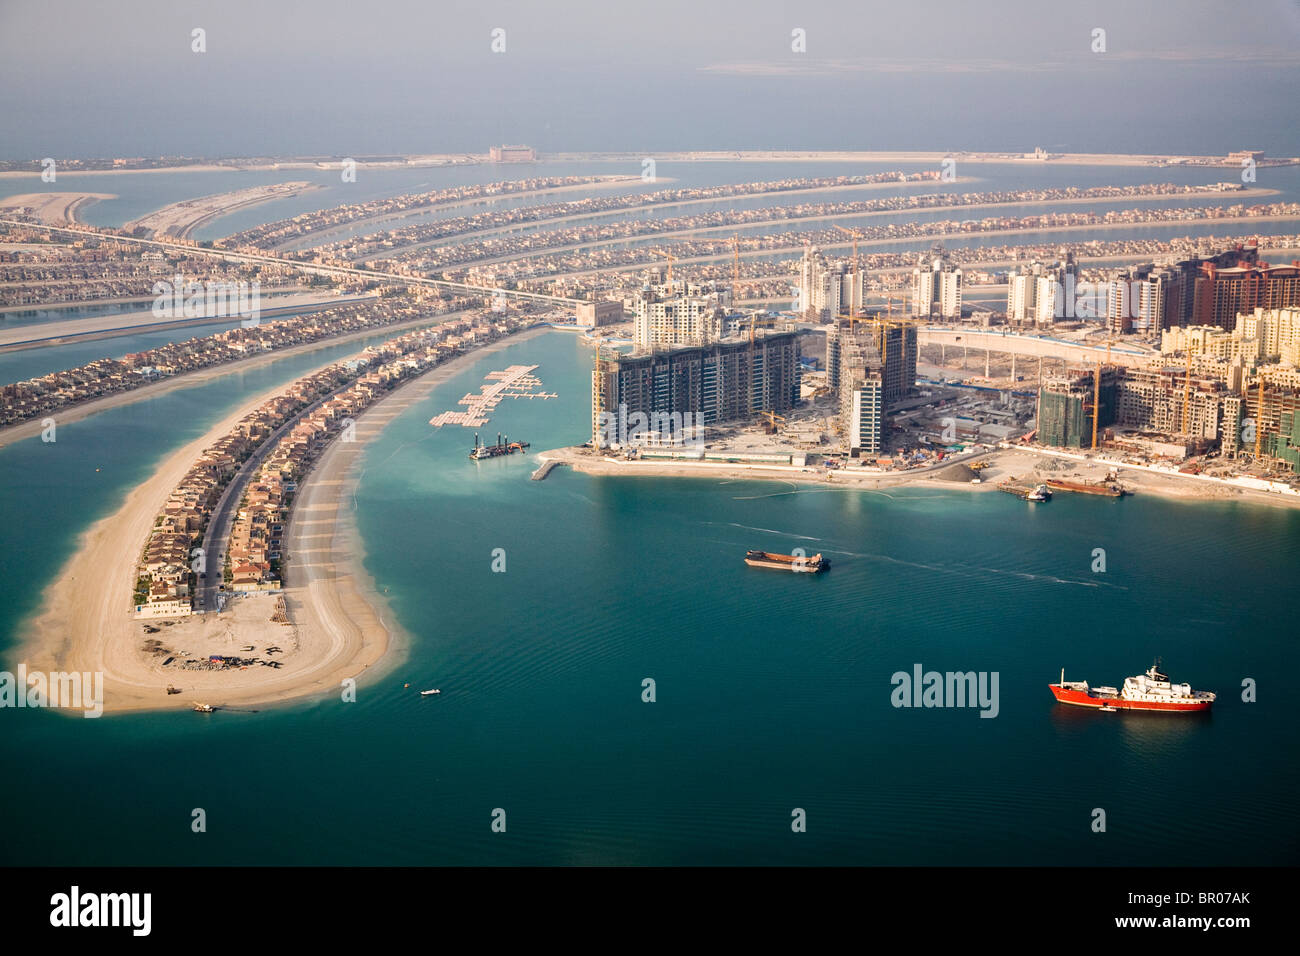 UAE, Dubai. Aerial of Palm Jumeirah artificial islands shaped like palm fronds, and apartment towers. Stock Photo